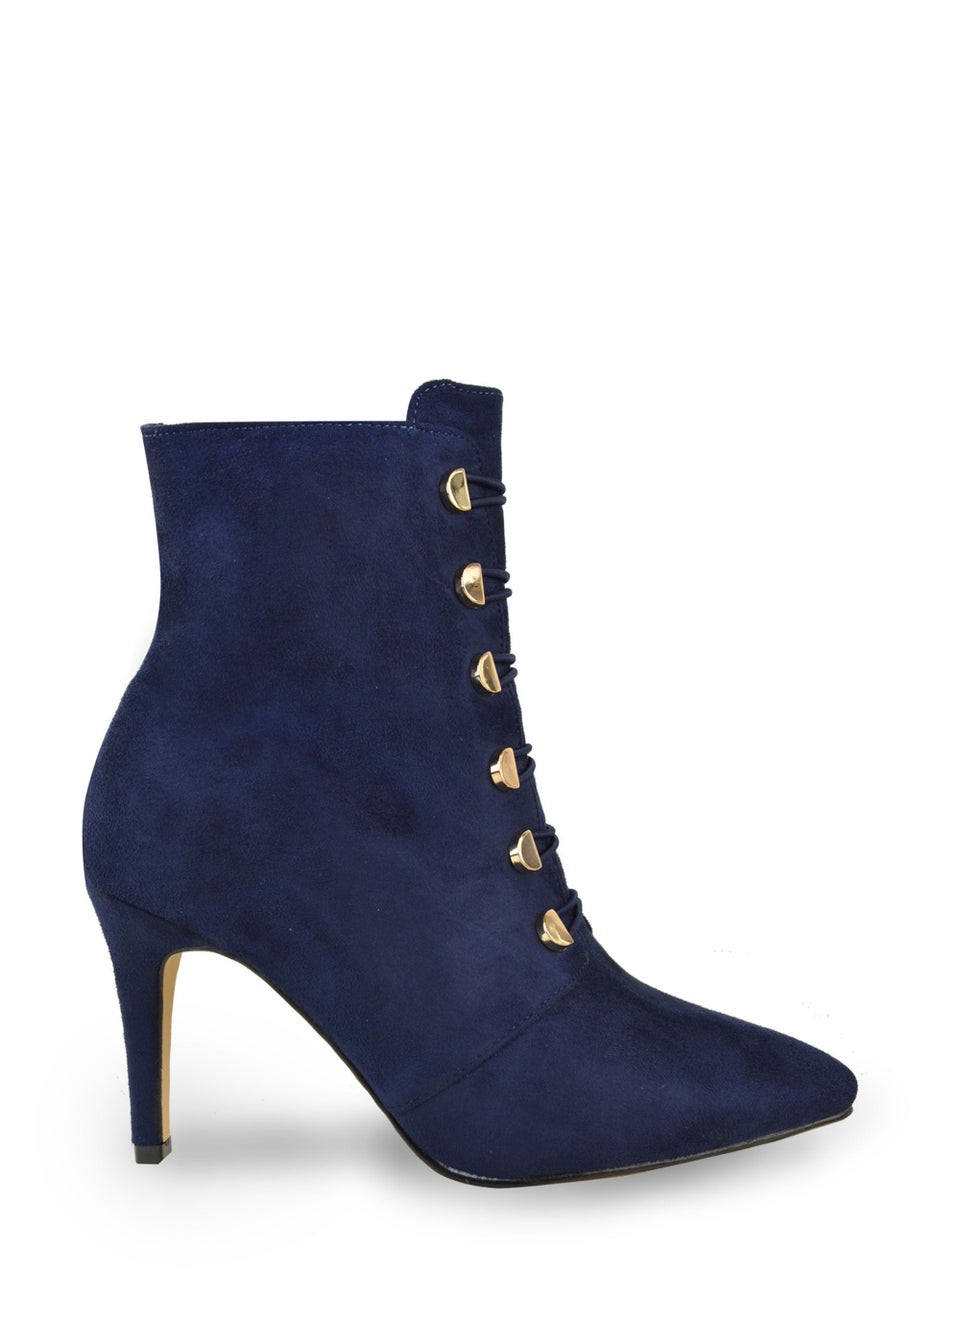 Where's That From Blue Suede Blythe Pointed Toe Ankle Boots